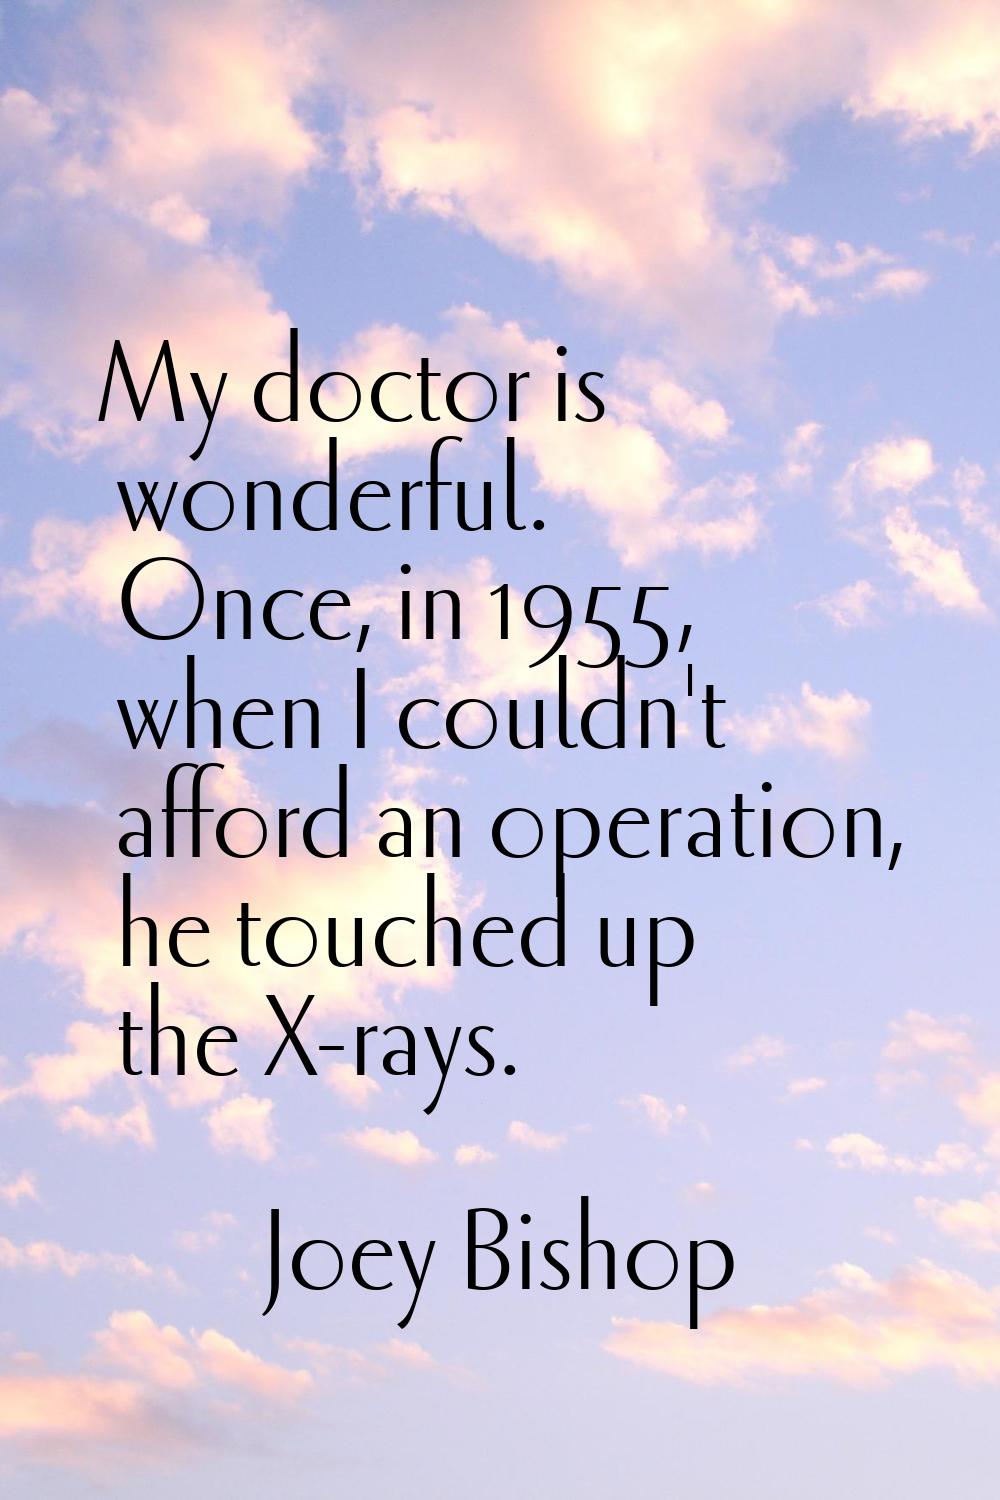 My doctor is wonderful. Once, in 1955, when I couldn't afford an operation, he touched up the X-ray